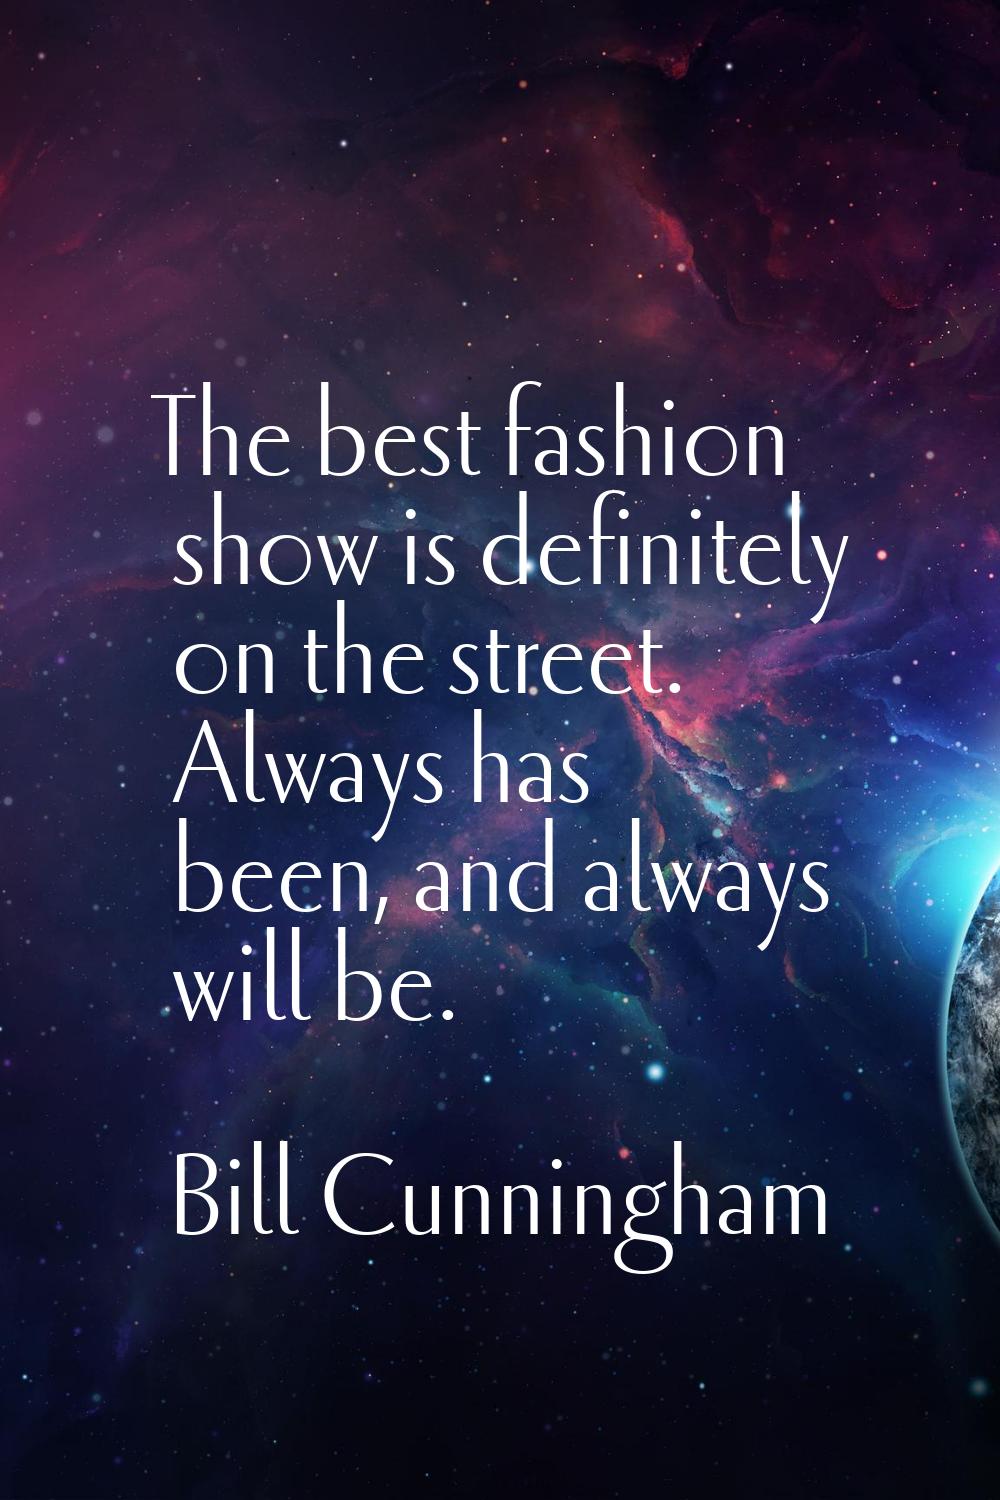 The best fashion show is definitely on the street. Always has been, and always will be.